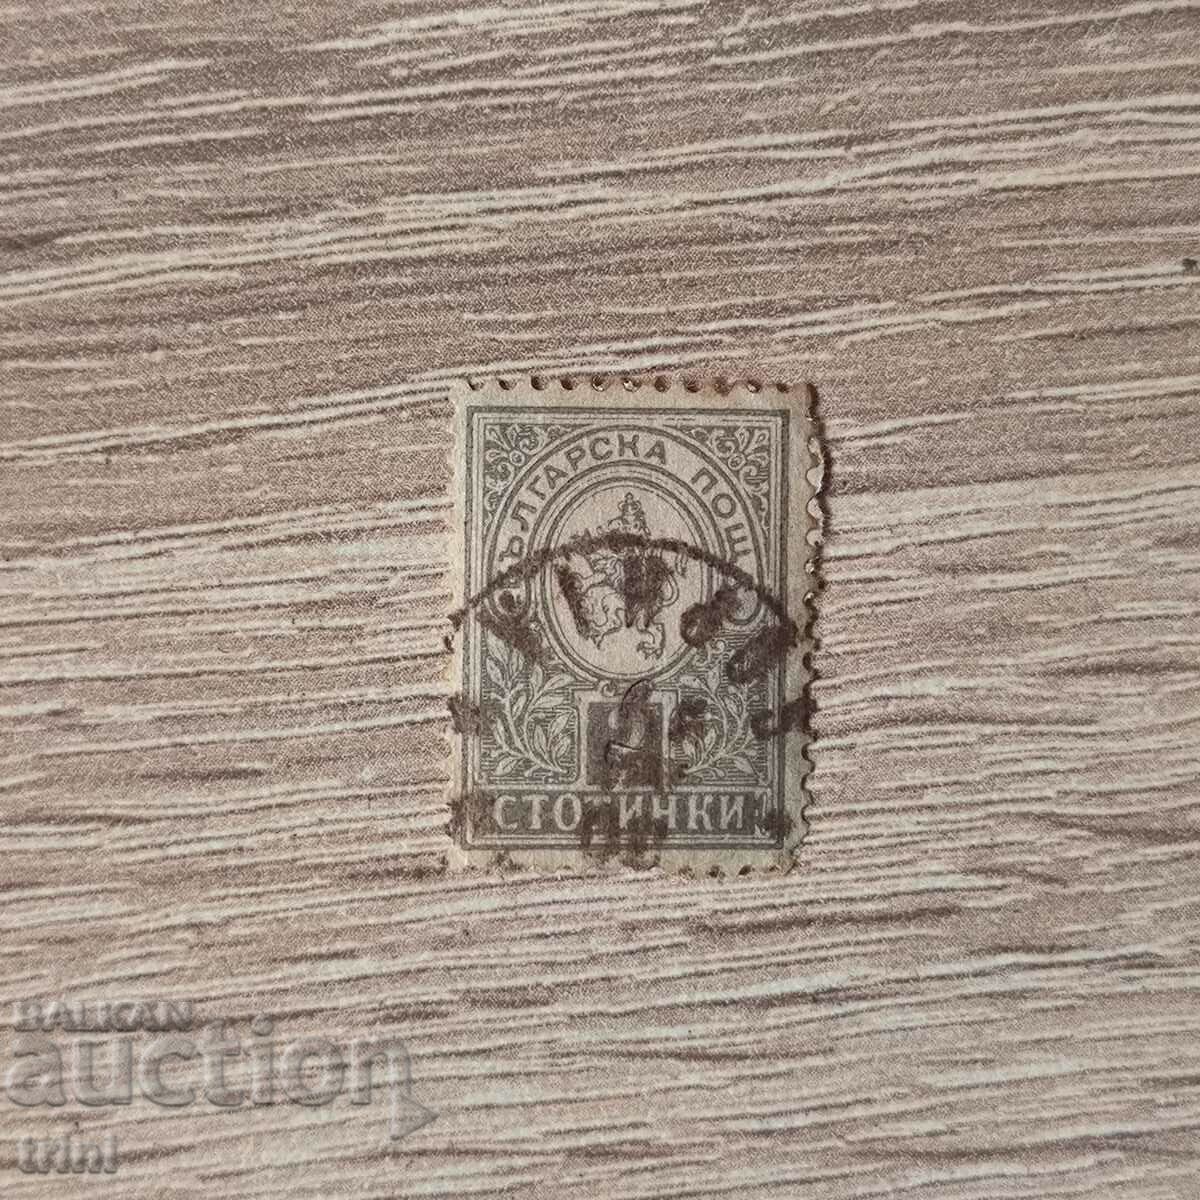 Bulgaria Small lion 1889 2 cents